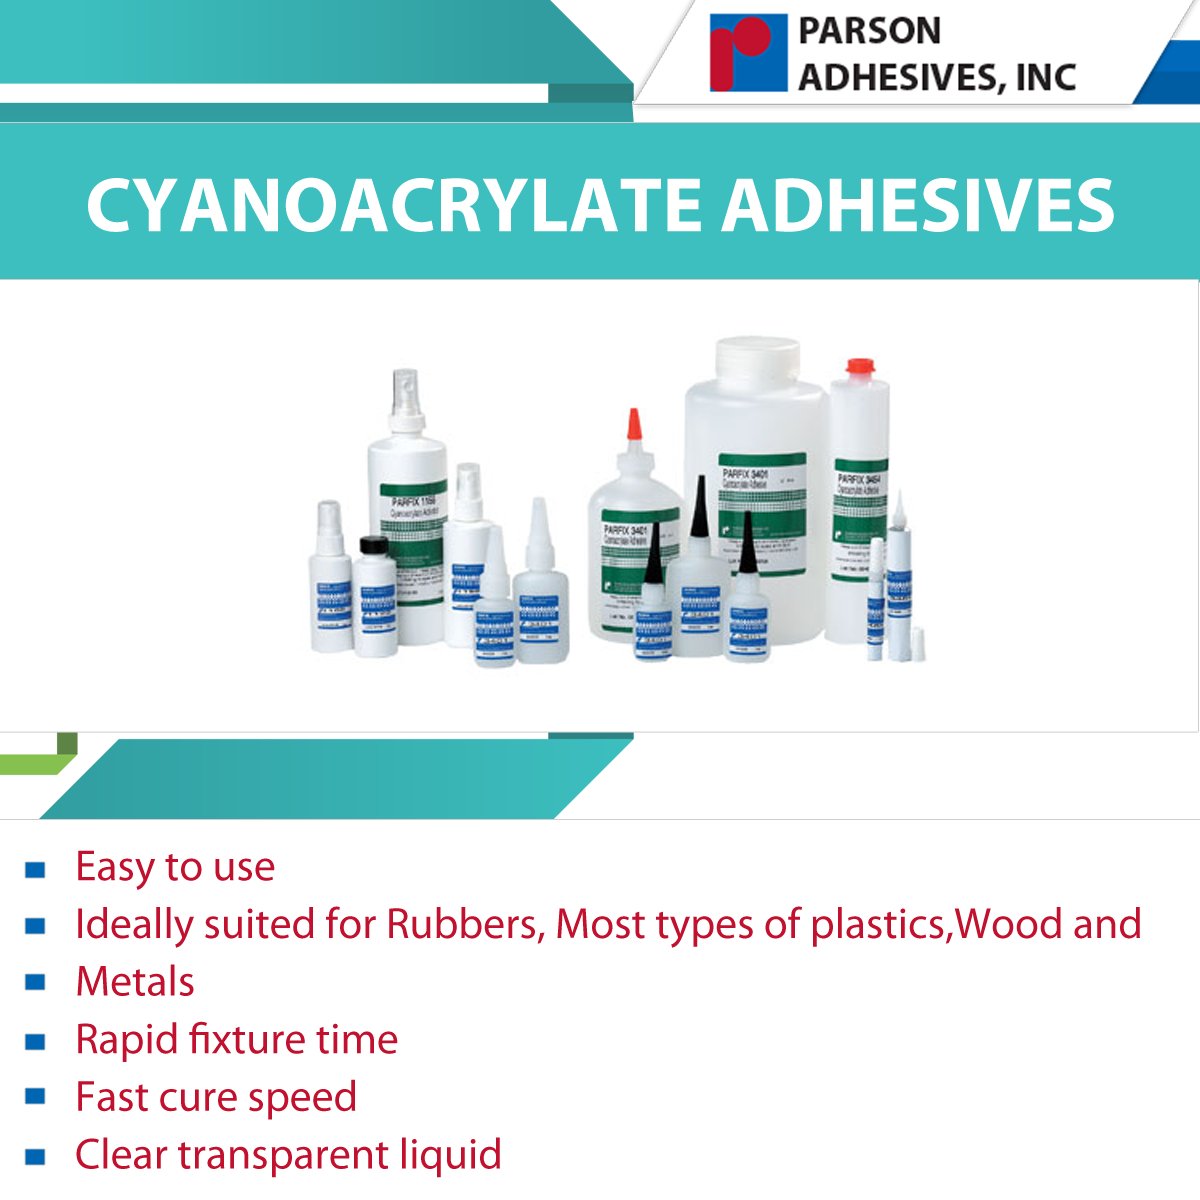 CYANOACRYLATE ADHESIVES are Easy to use, Ideally suited for Rubbers, Rapid fixture time, Fast cure speed, Clear transparent liquid.
You can find them here: goo.gl/F1PFkF
#IndustrialAdhesives #EngineeringApplications #PlasticBondingAdhesives